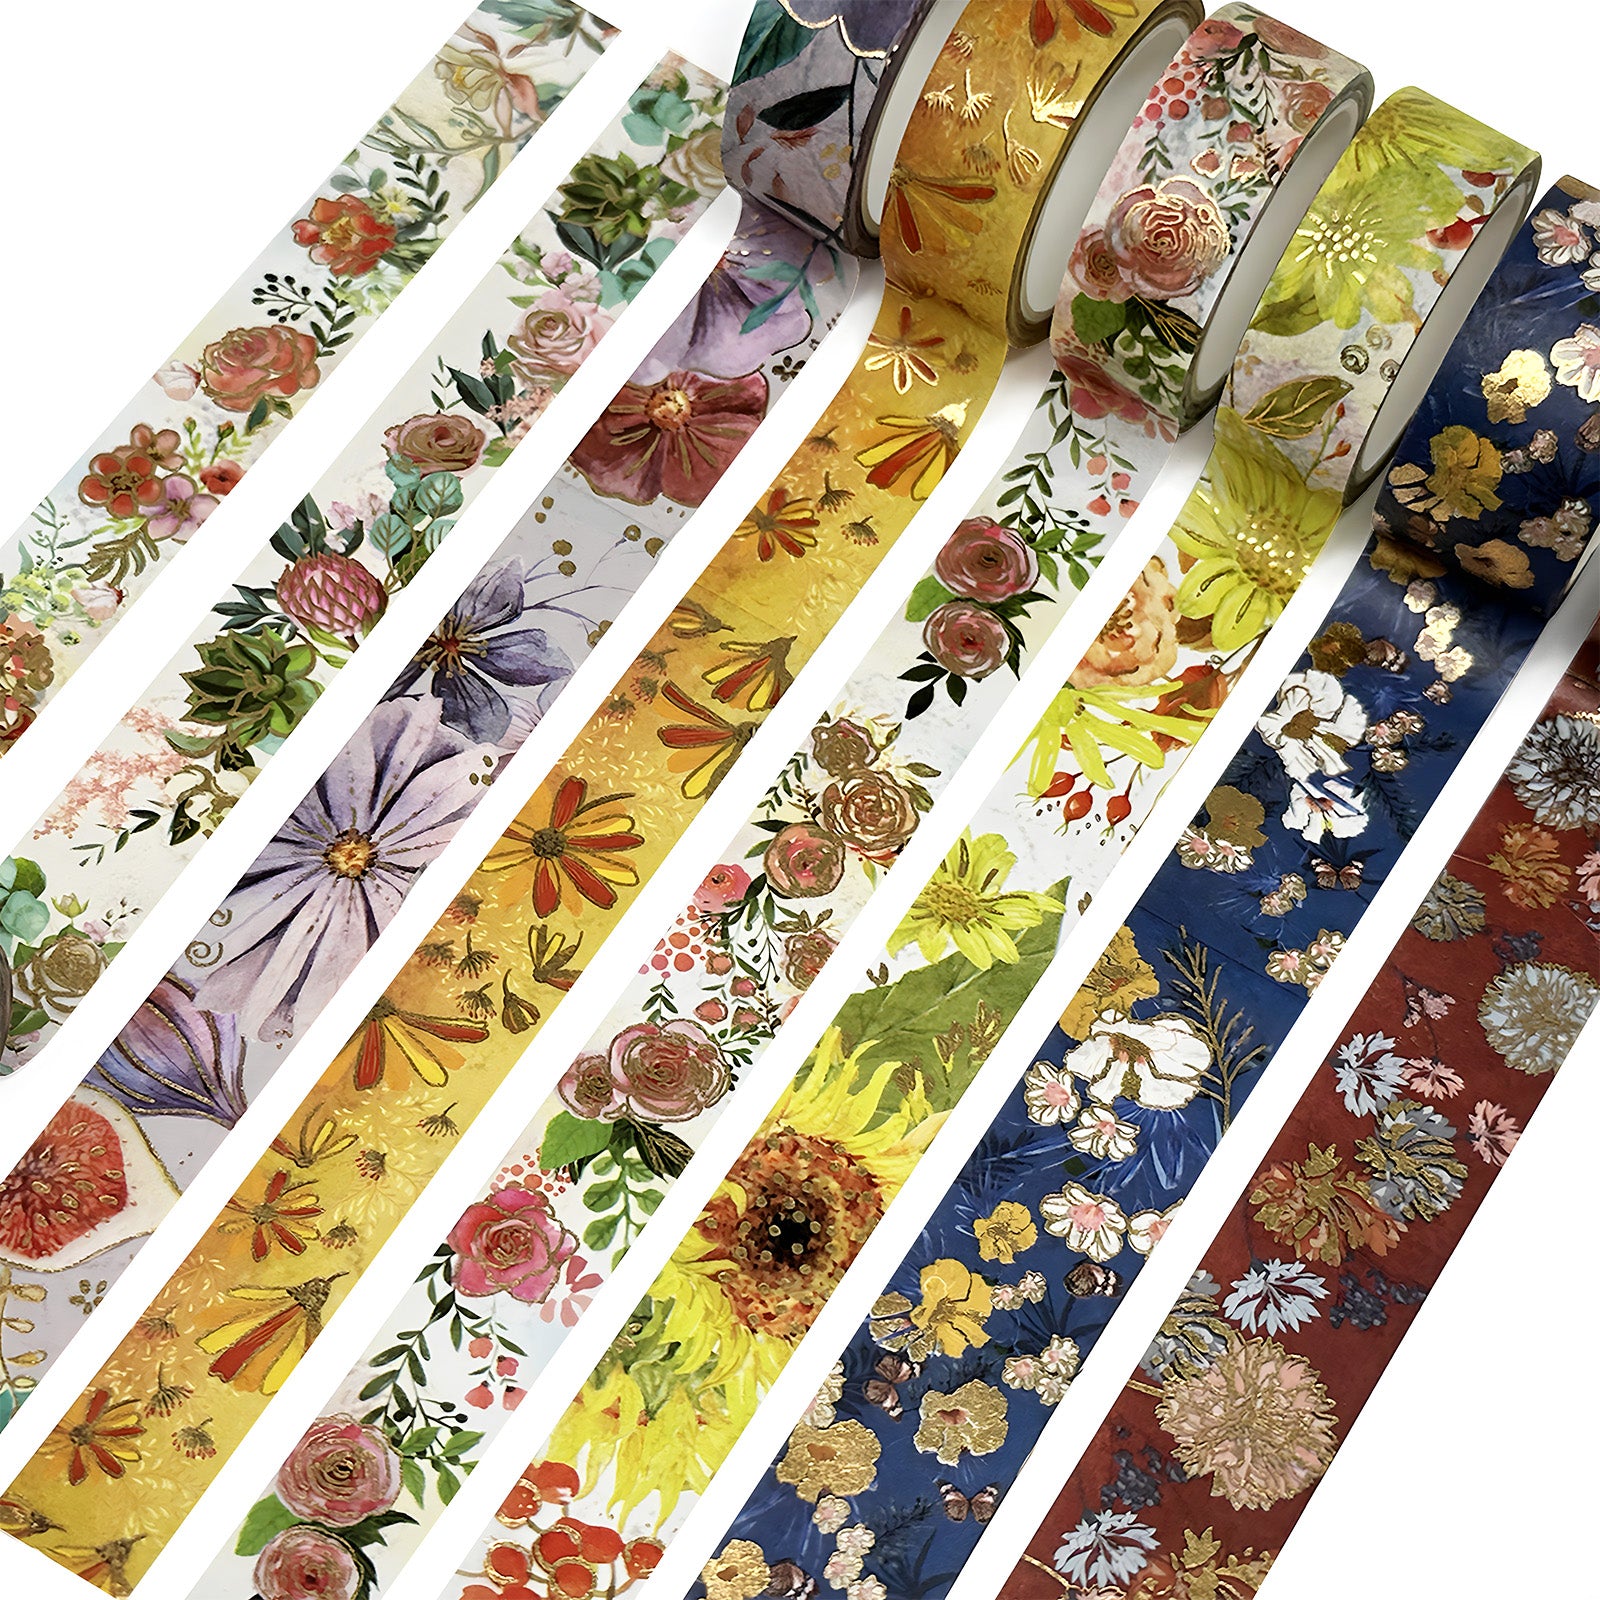  8 Rolls Washi Tape Set, Cute Green Plants Floral Animals, Decorative  Tape for Scrapbooks, Journals, DIY Decor and Craft Aplied (Green)